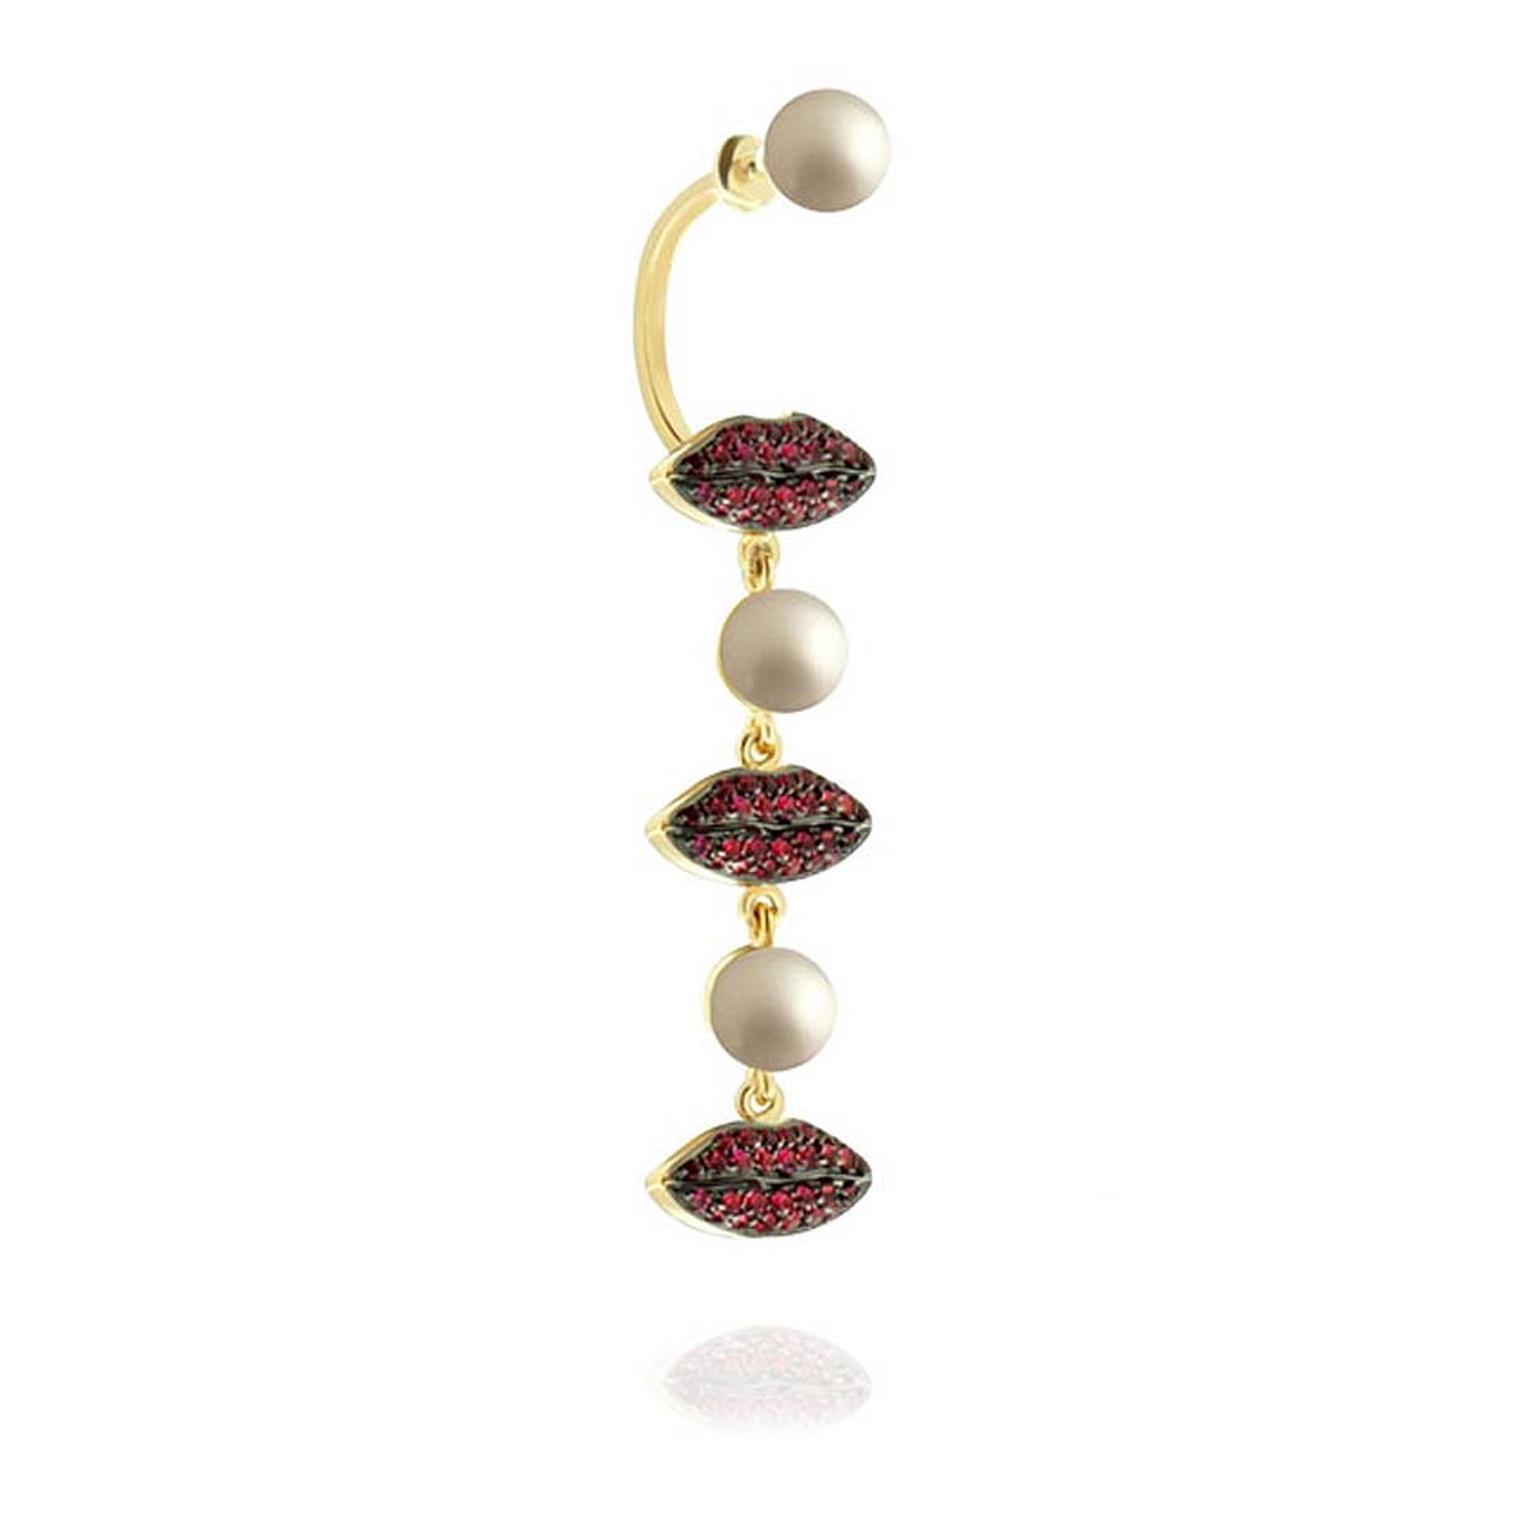 Delfina Delettrez Lips on Me single earring in yellow gold with pearls and rubies from the Anatomic collection. €3,600.